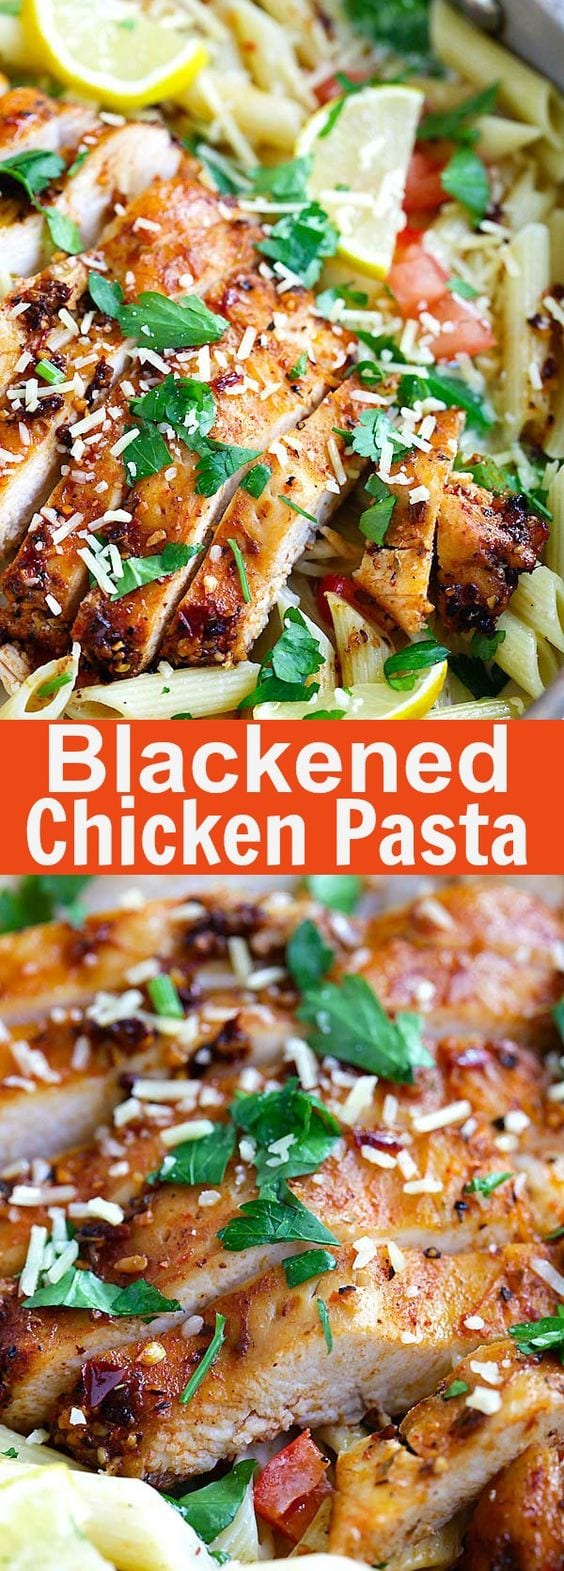 Blackened Chicken Pasta - Creamy pasta with spicy blackened spice chicken breast. Family friendly dinner has never been so good | rasamalaysia.com